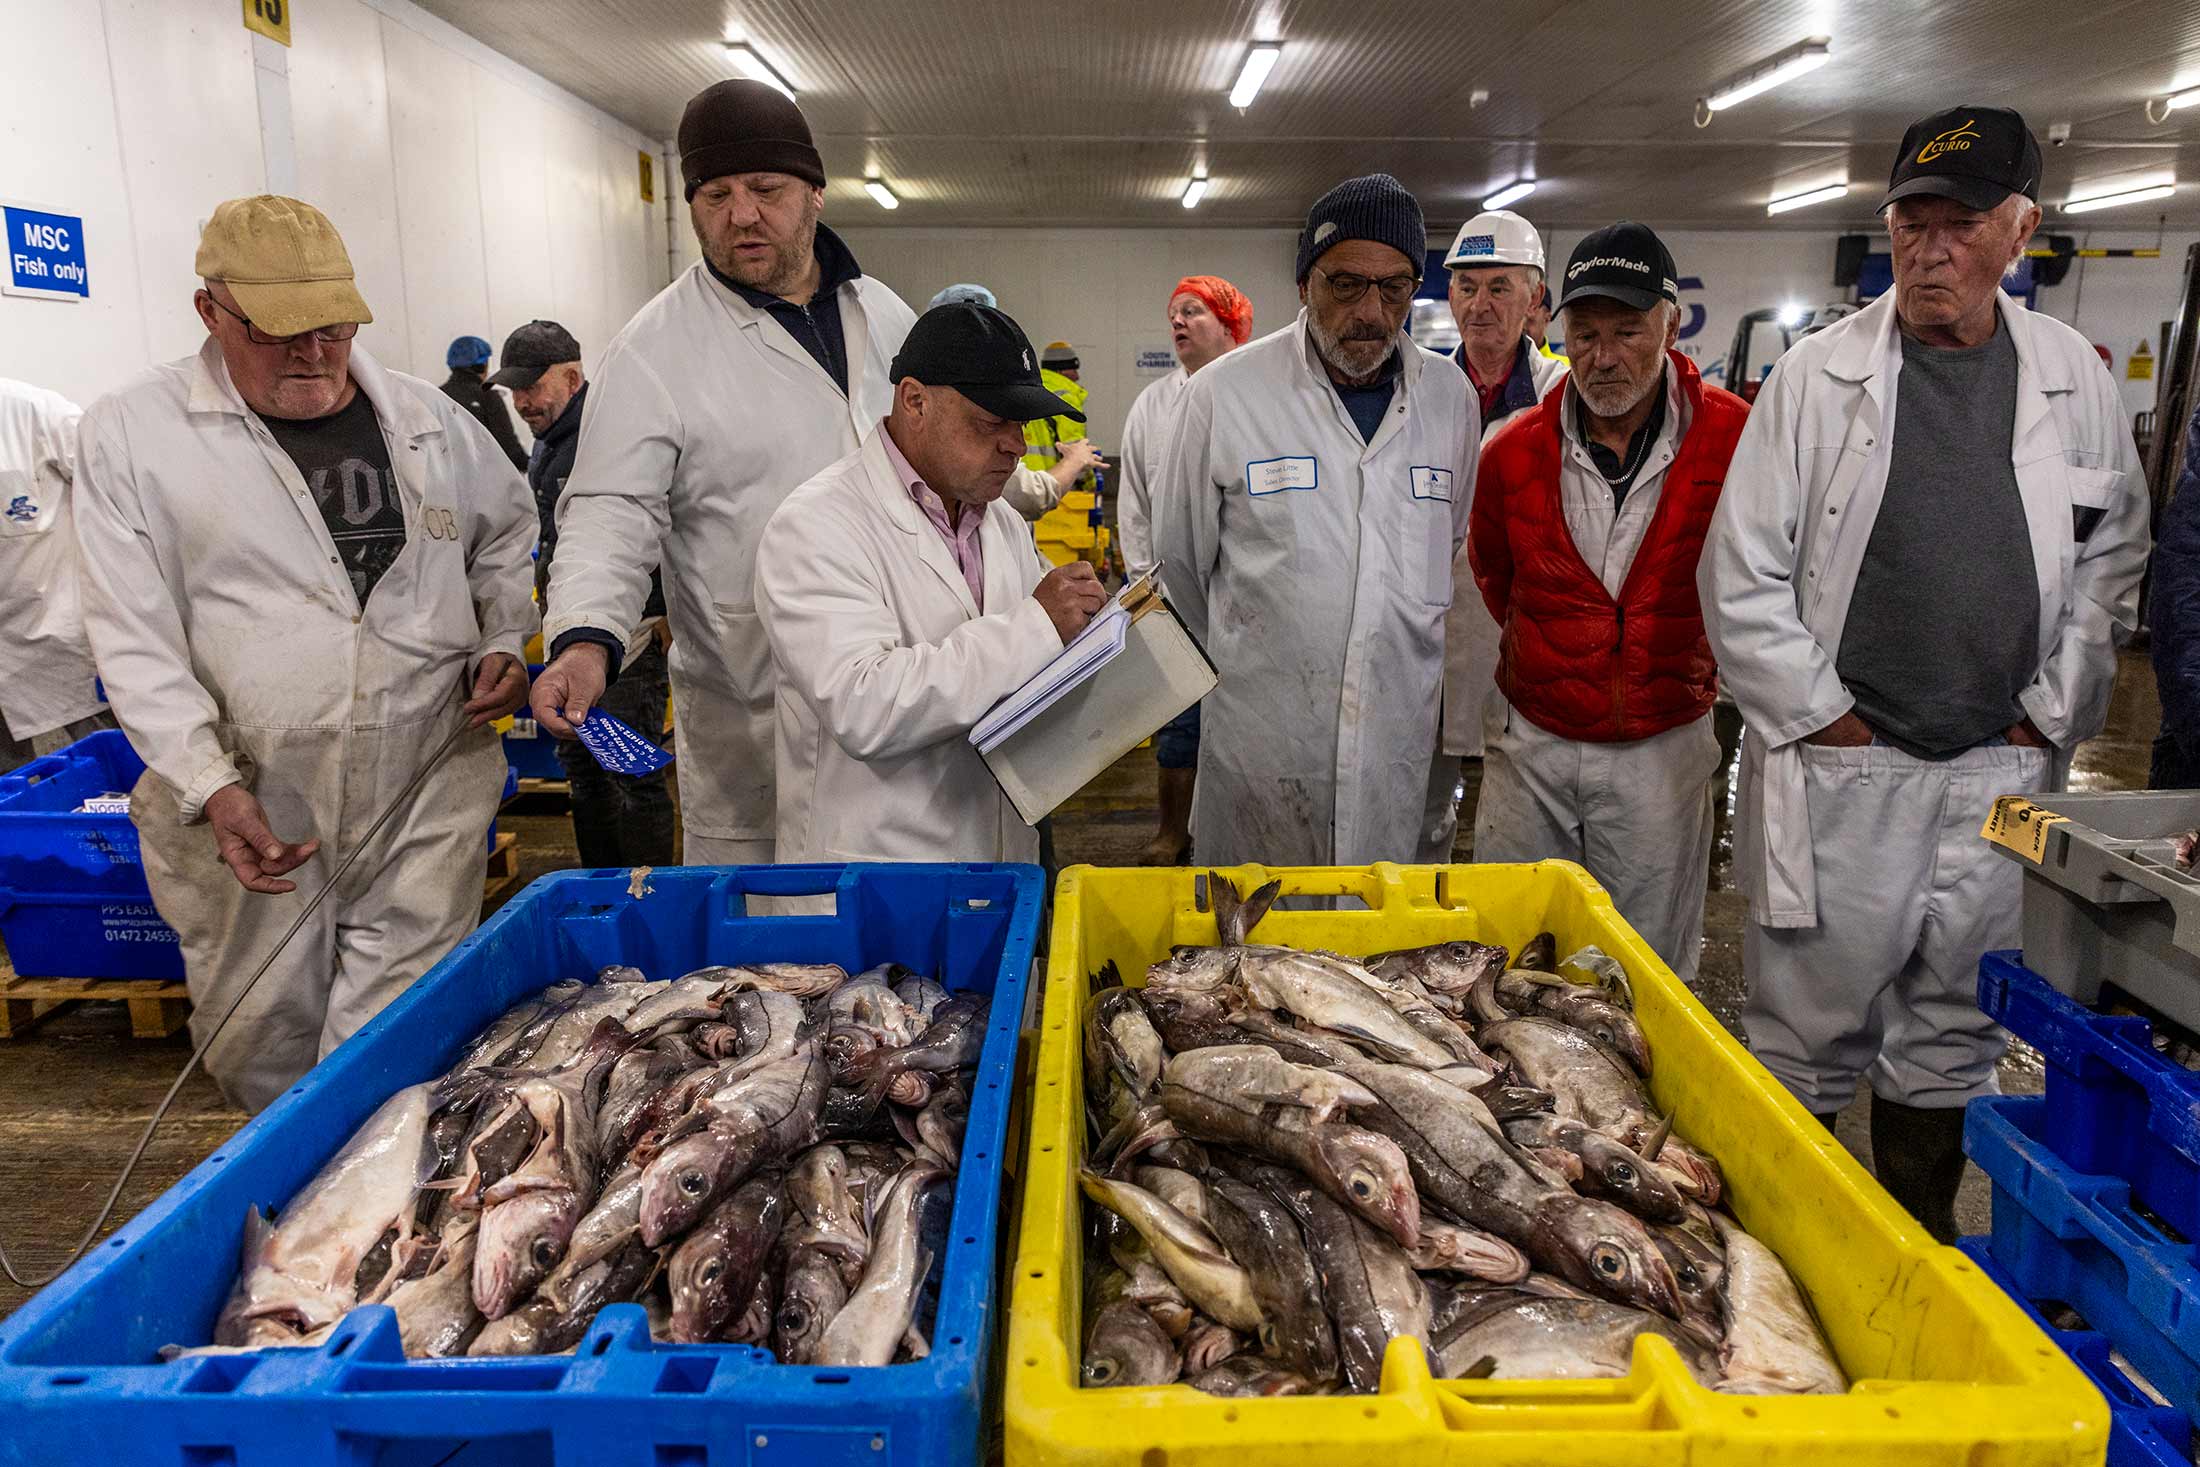 Our worst-case scenario is Britain's too': German fears for fishing  industry, Fishing